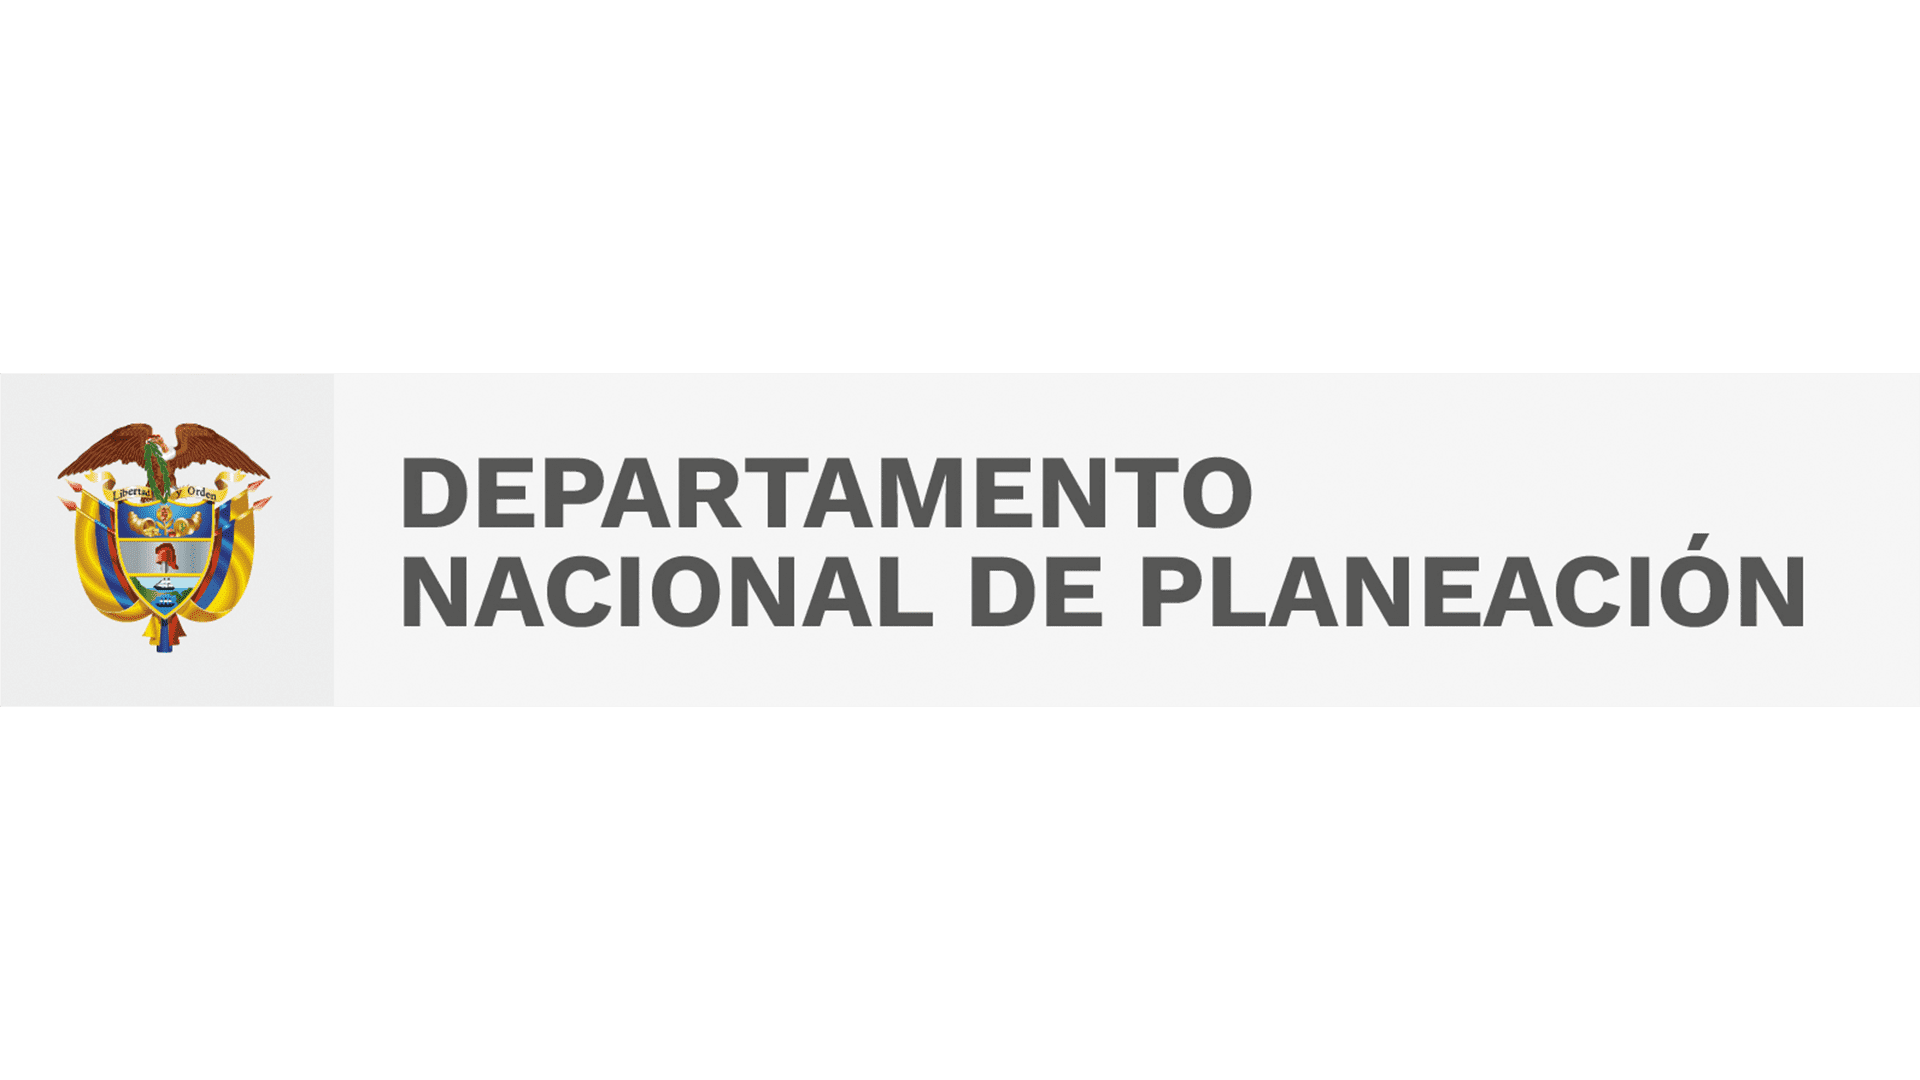 National Planning Department's logo